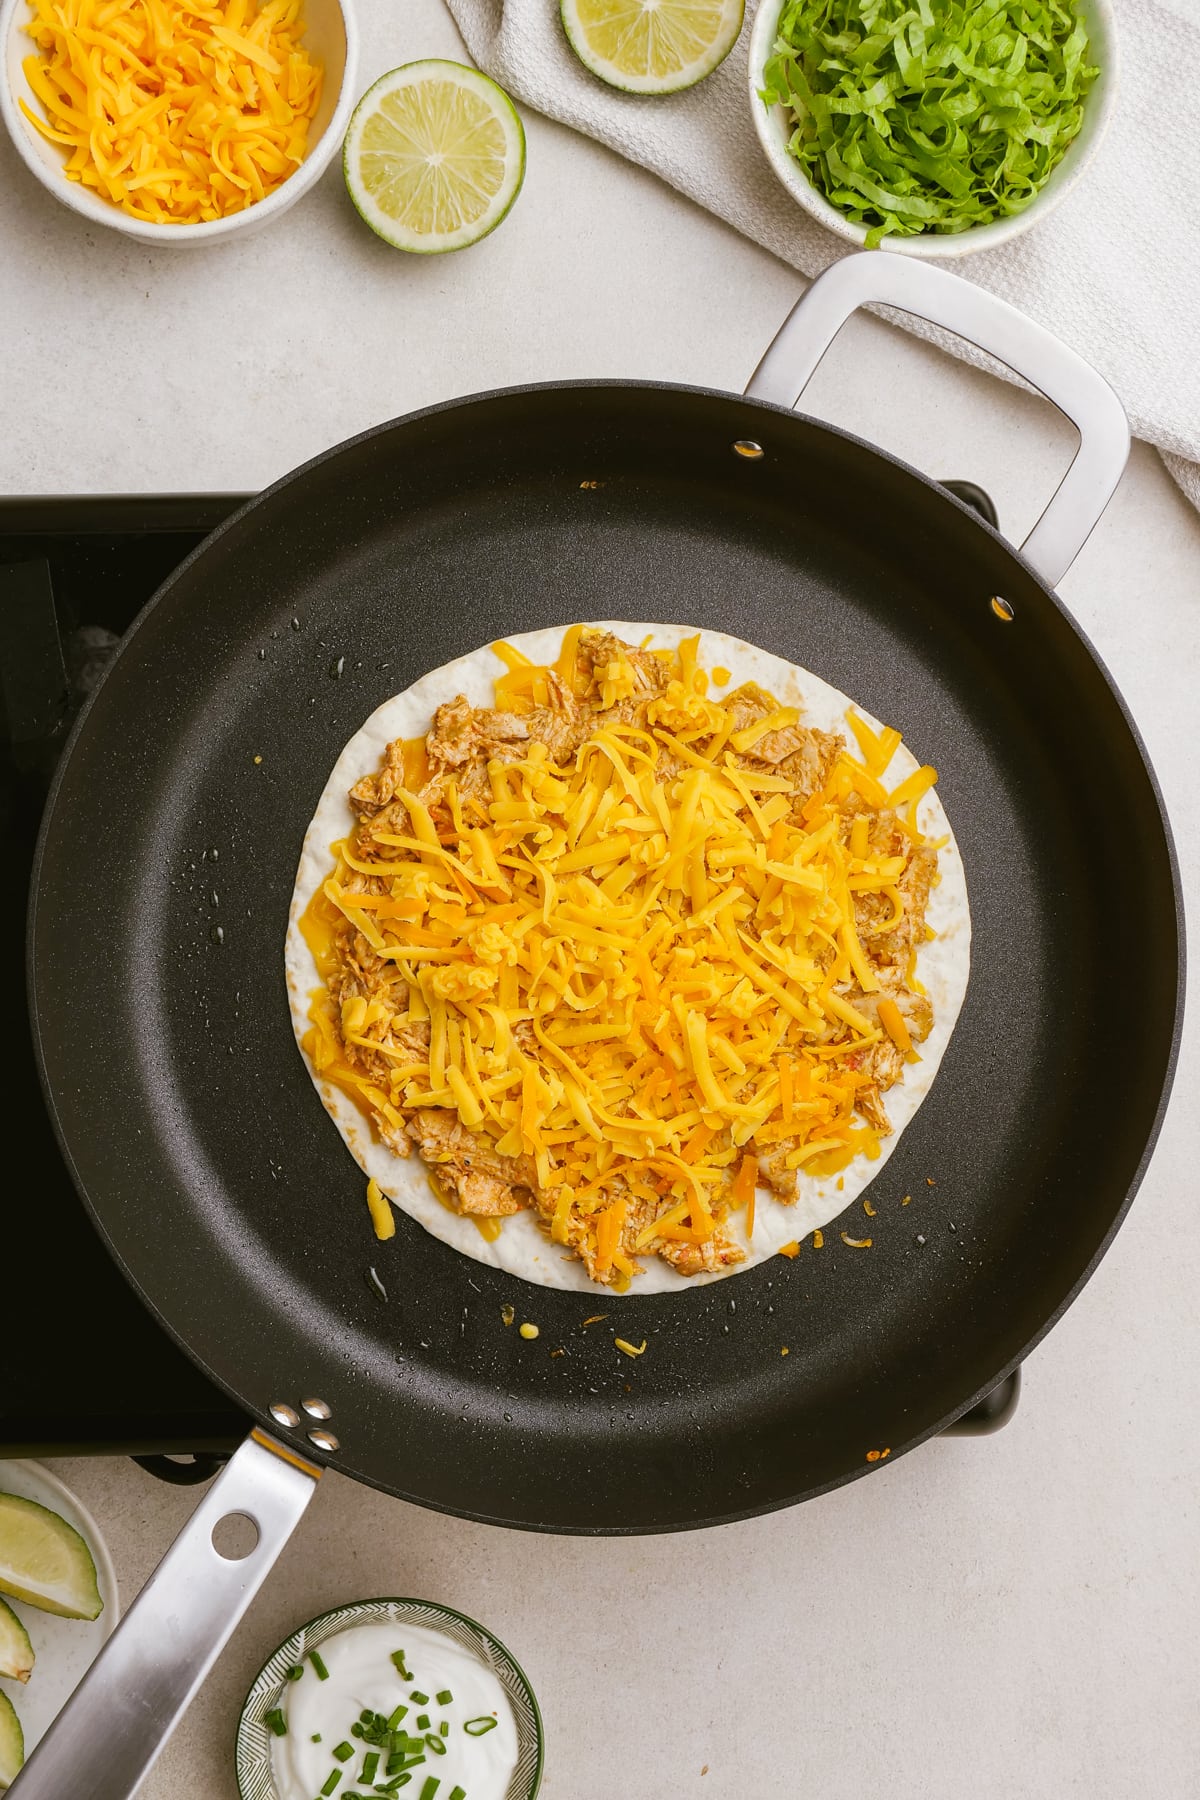 tortilla on skillet with shredded cheese and chicken